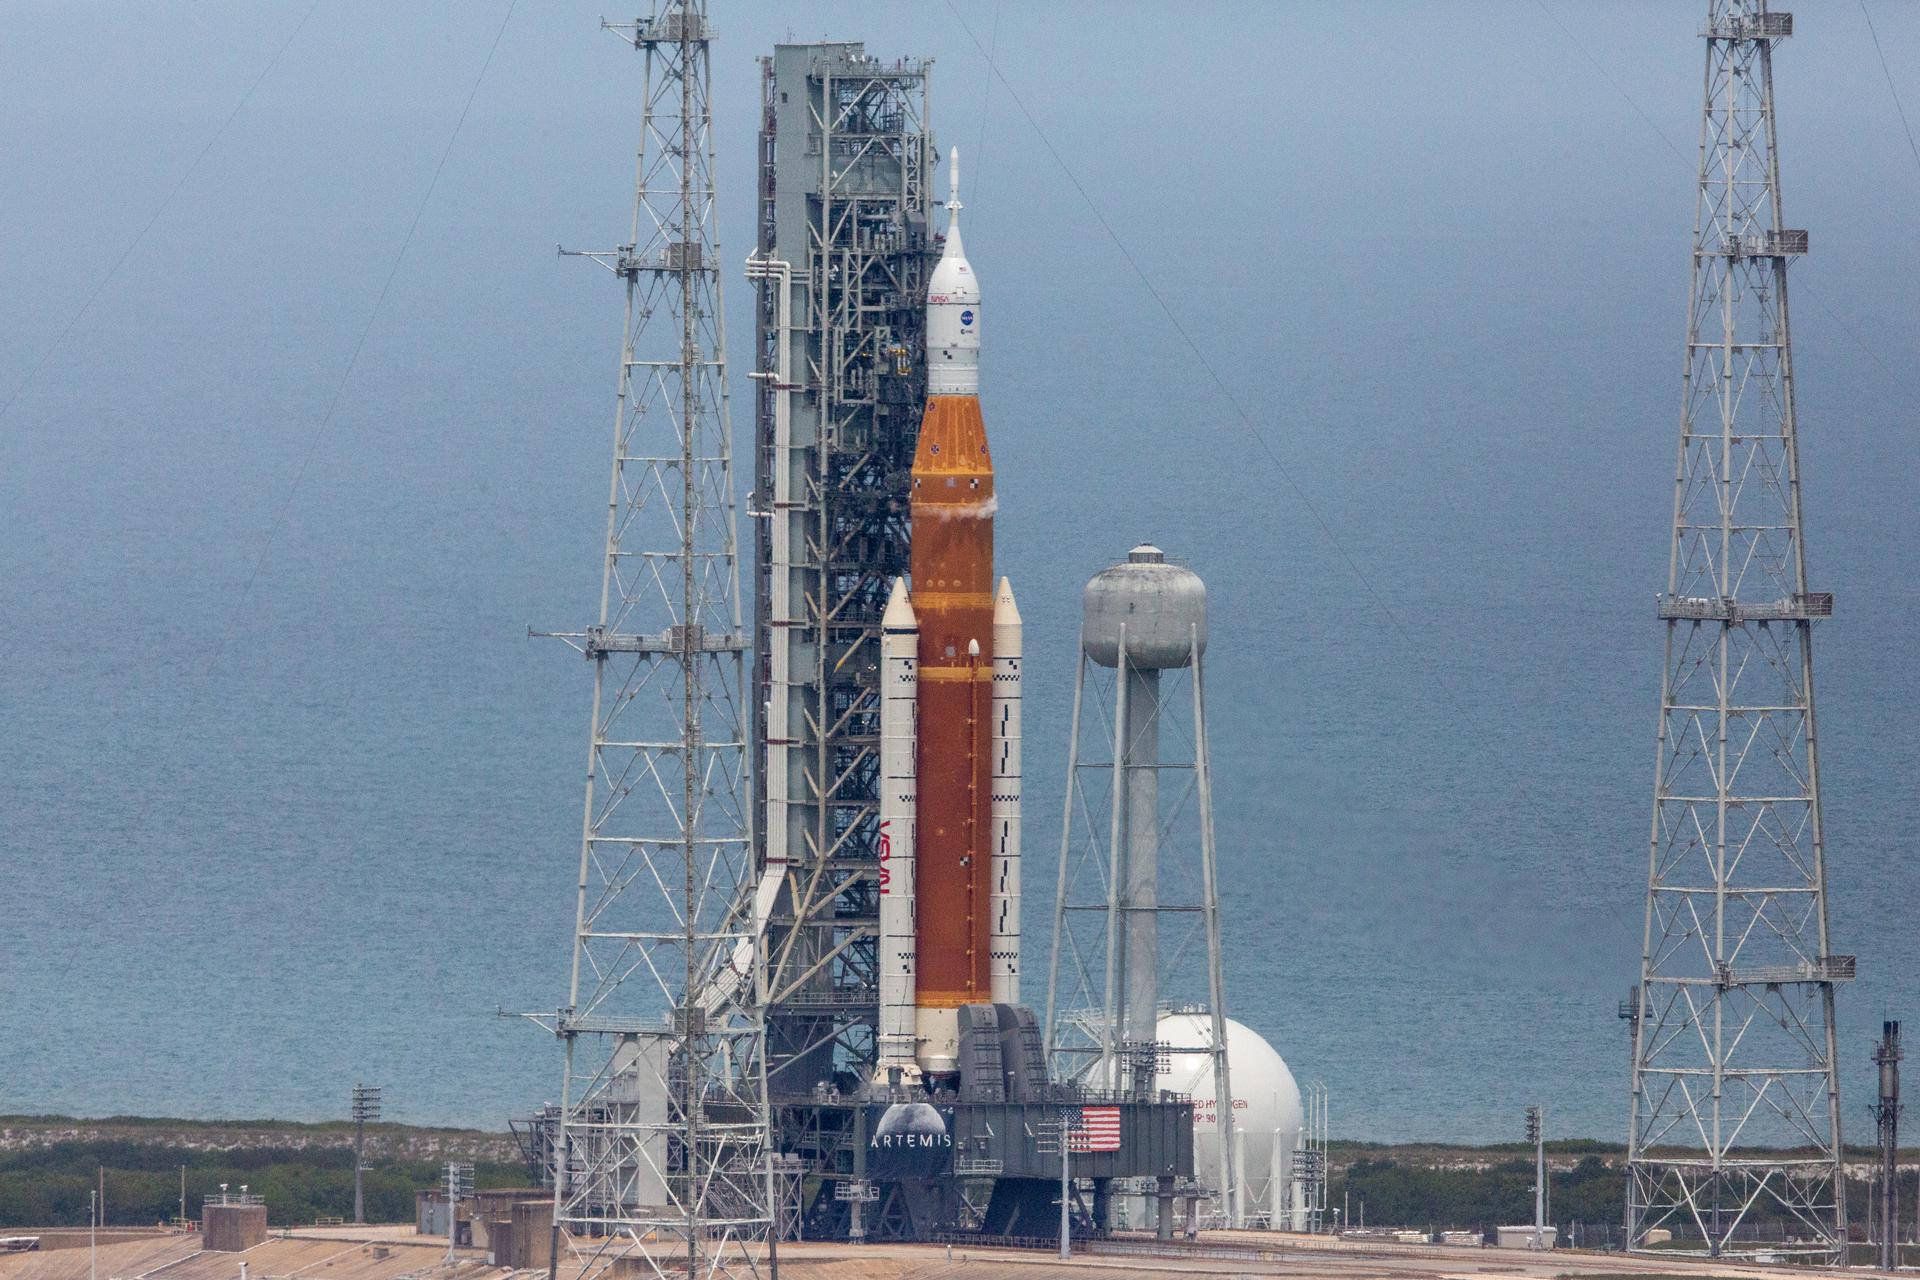 Nasa’s Space Launch System rocket and Orion spacecraft on the launch pad at Kennedy Space Center in Florida for a “wet dress rehearsal” for launch in April, 2022